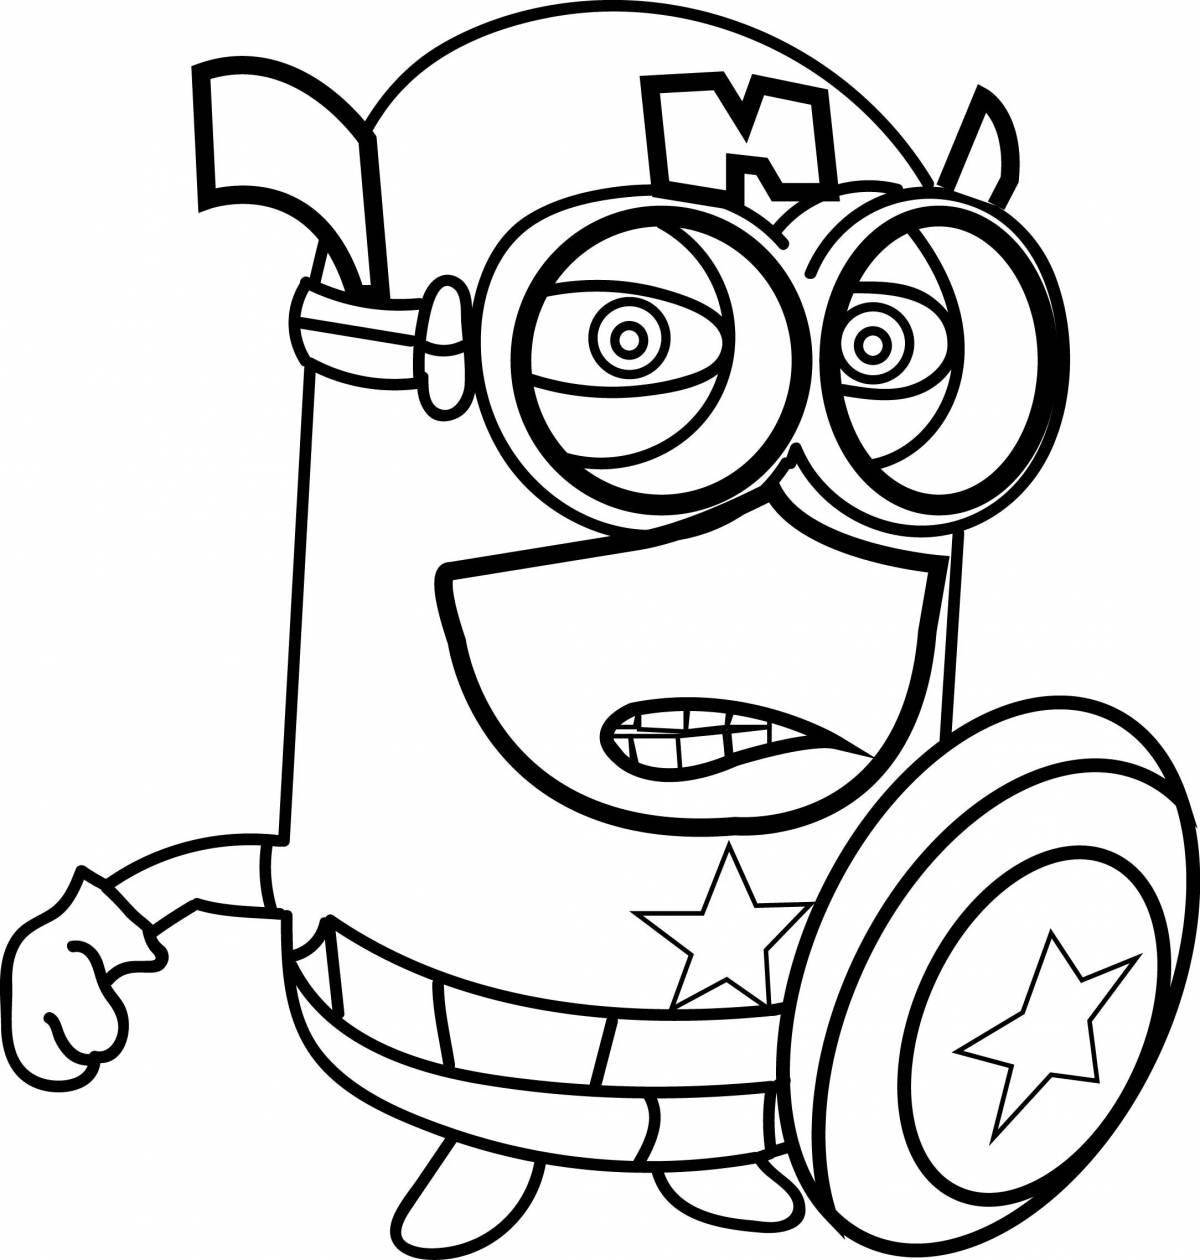 Color-party cool coloring page for kids